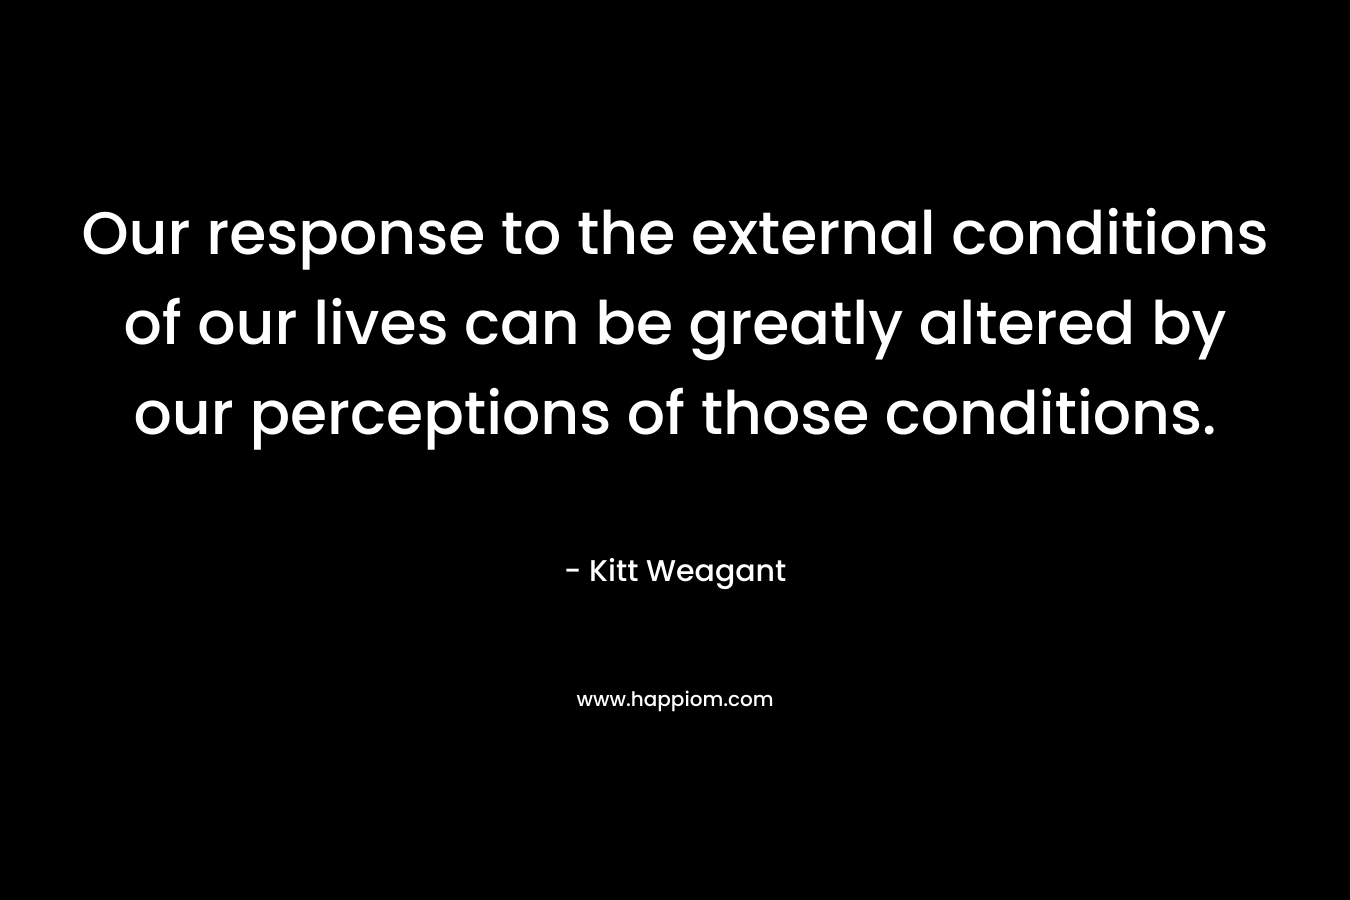 Our response to the external conditions of our lives can be greatly altered by our perceptions of those conditions. – Kitt Weagant